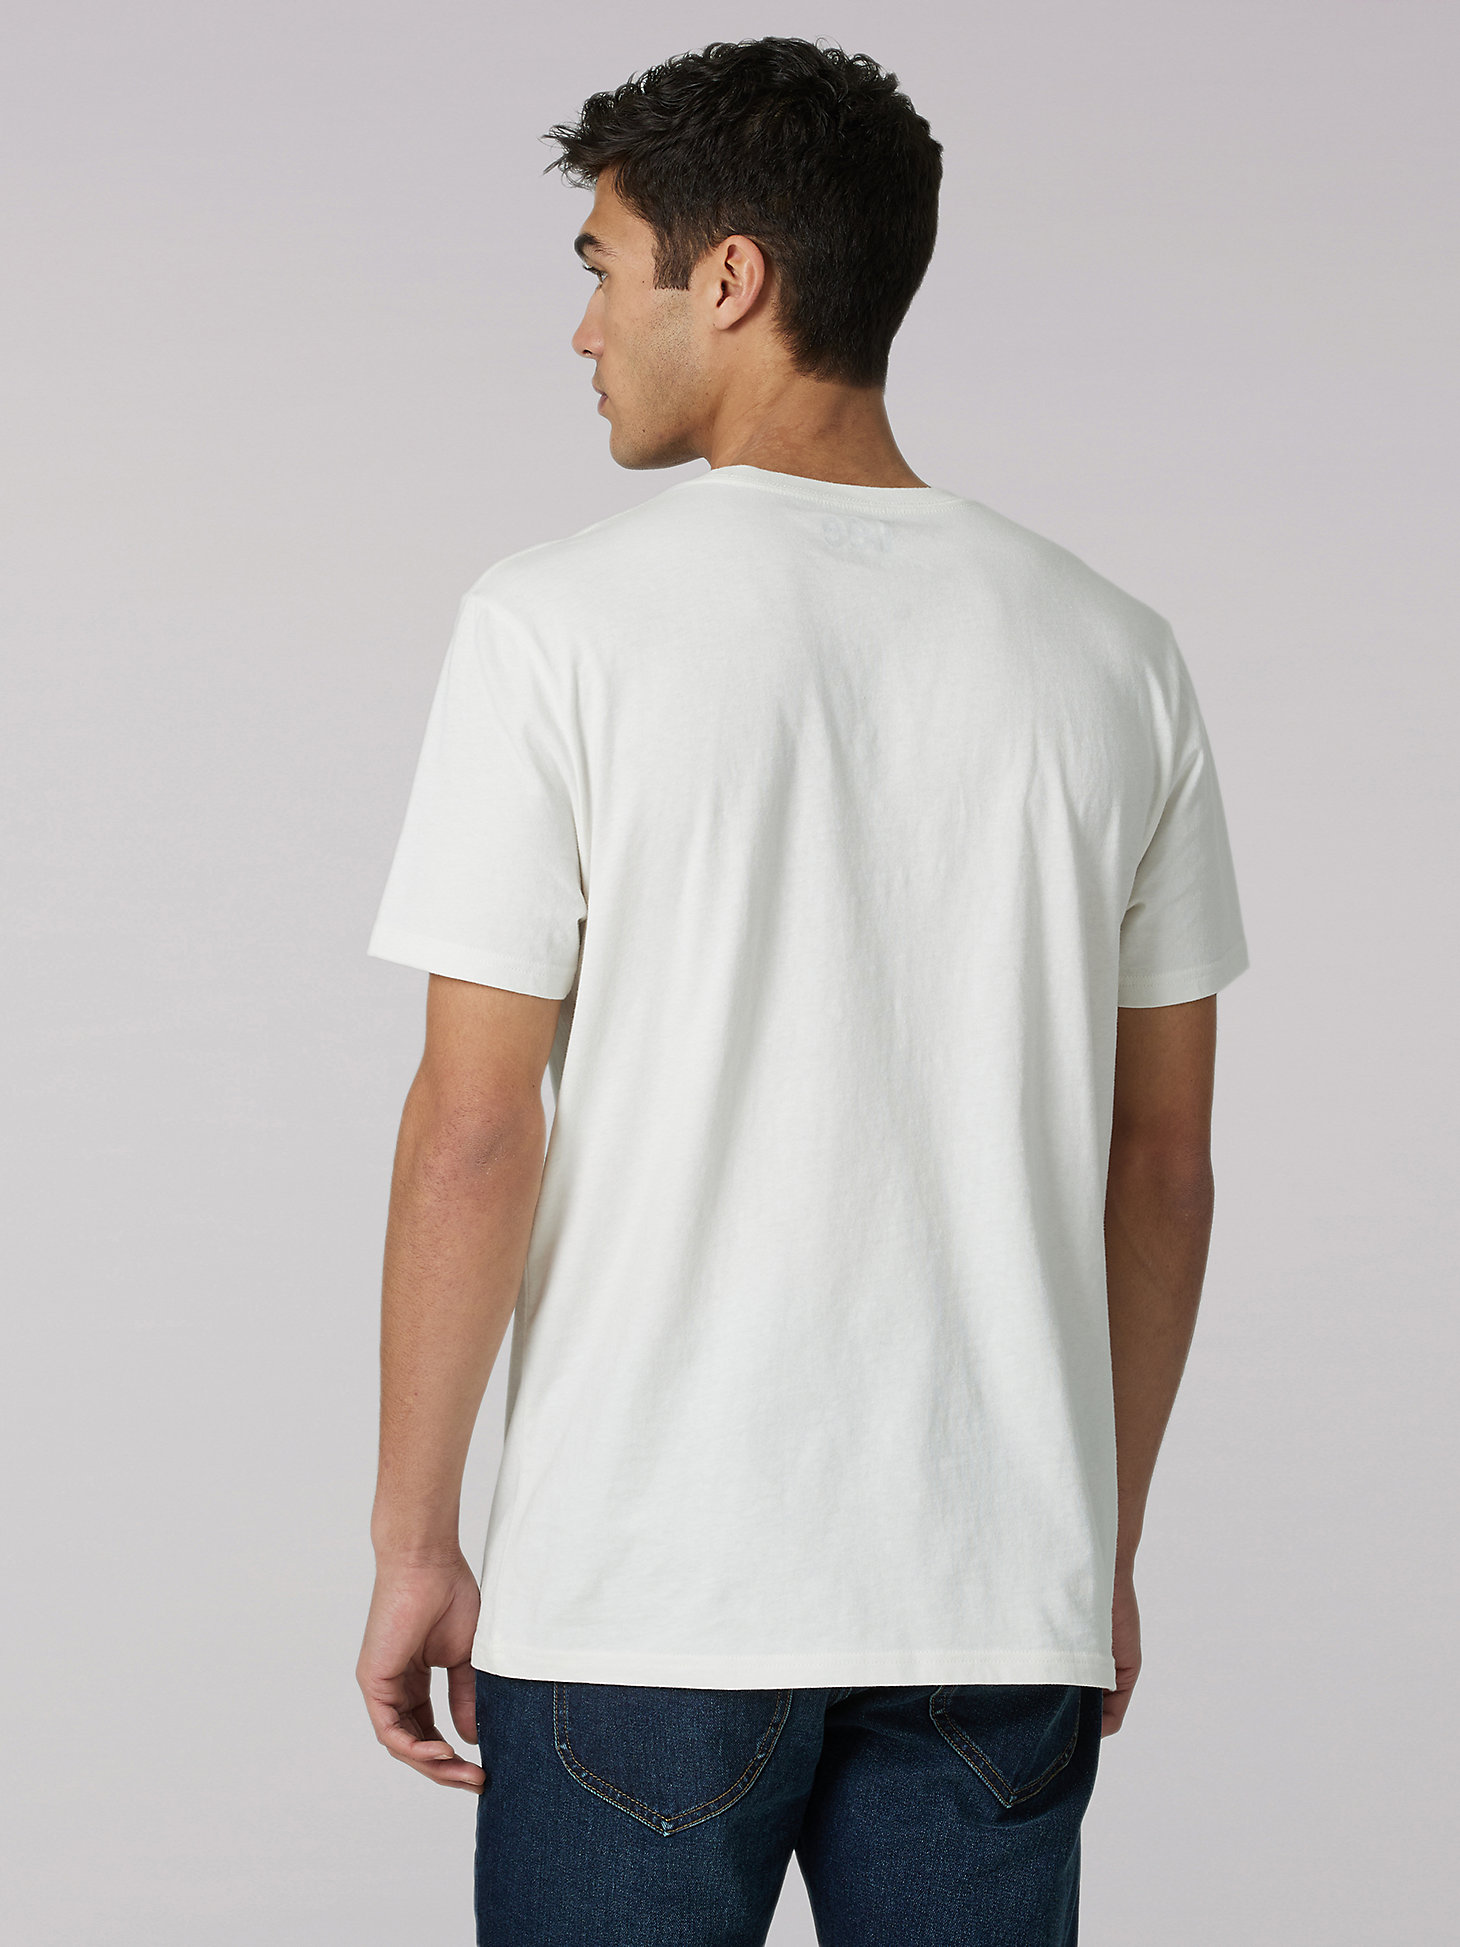 Men's Heritage Lee Crafted With Purpose Tee in Tofu alternative view 1